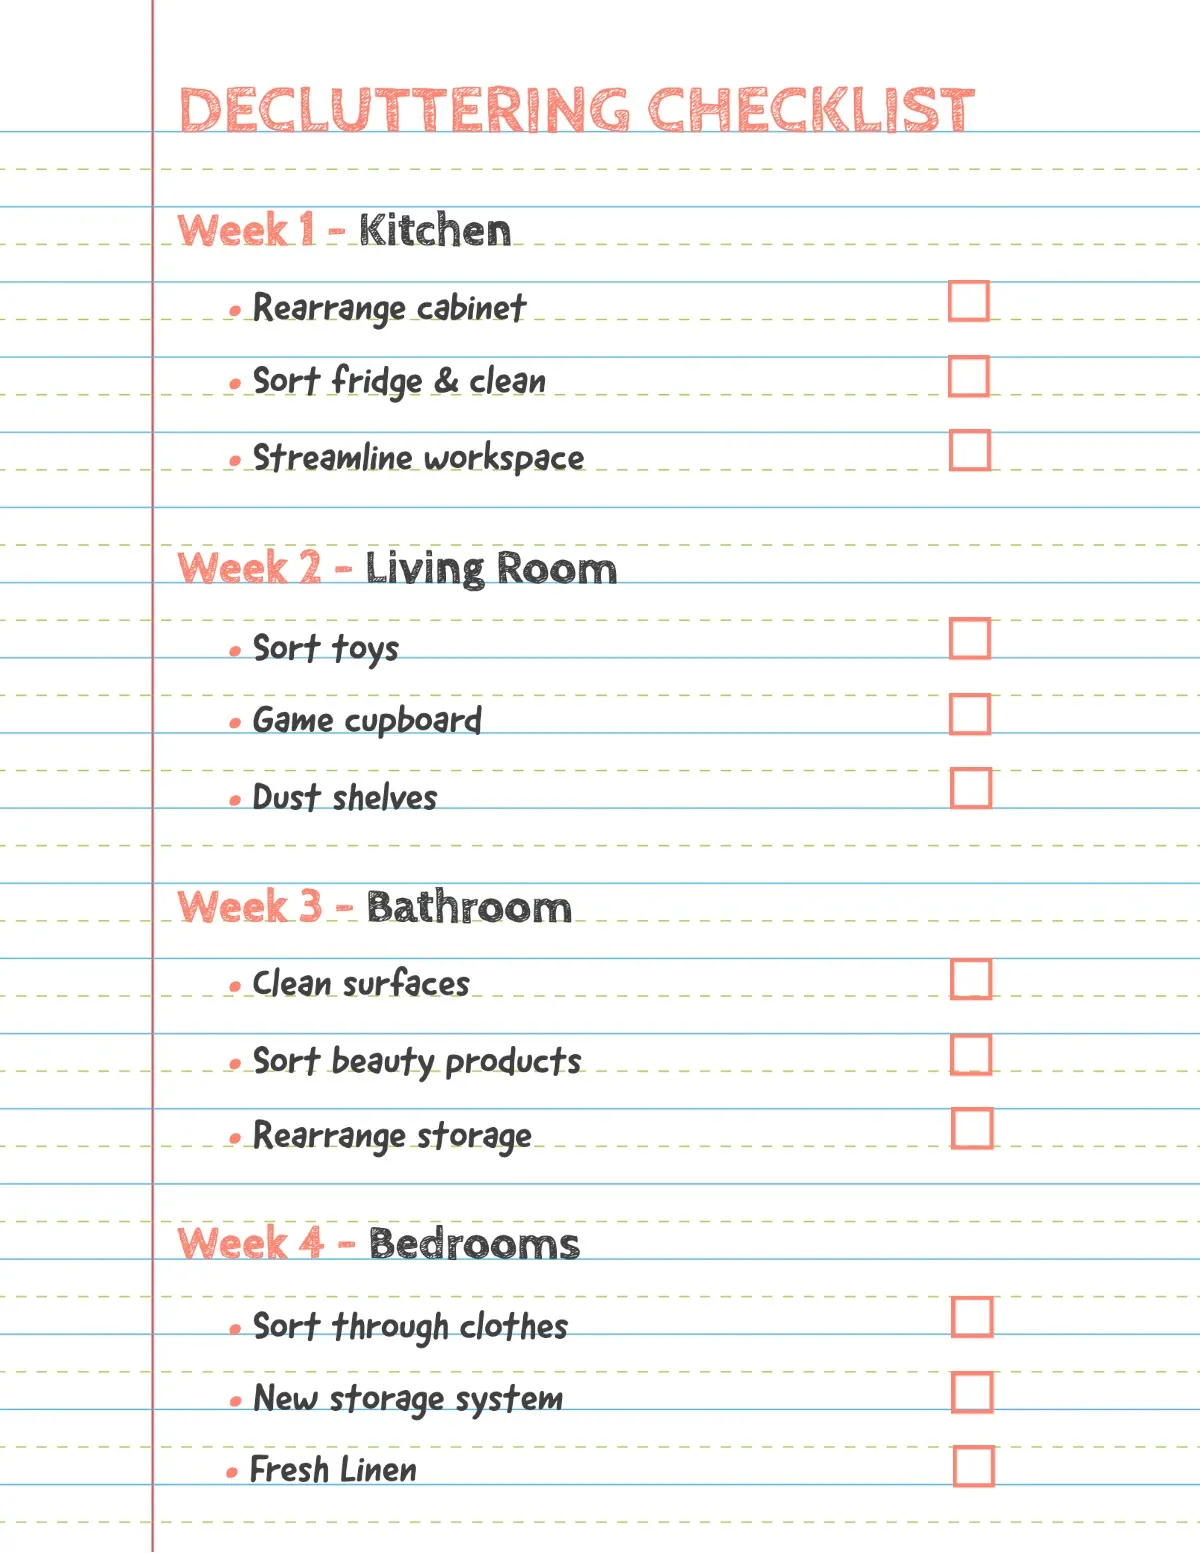 Red and White Notepad Decluttering Checklist